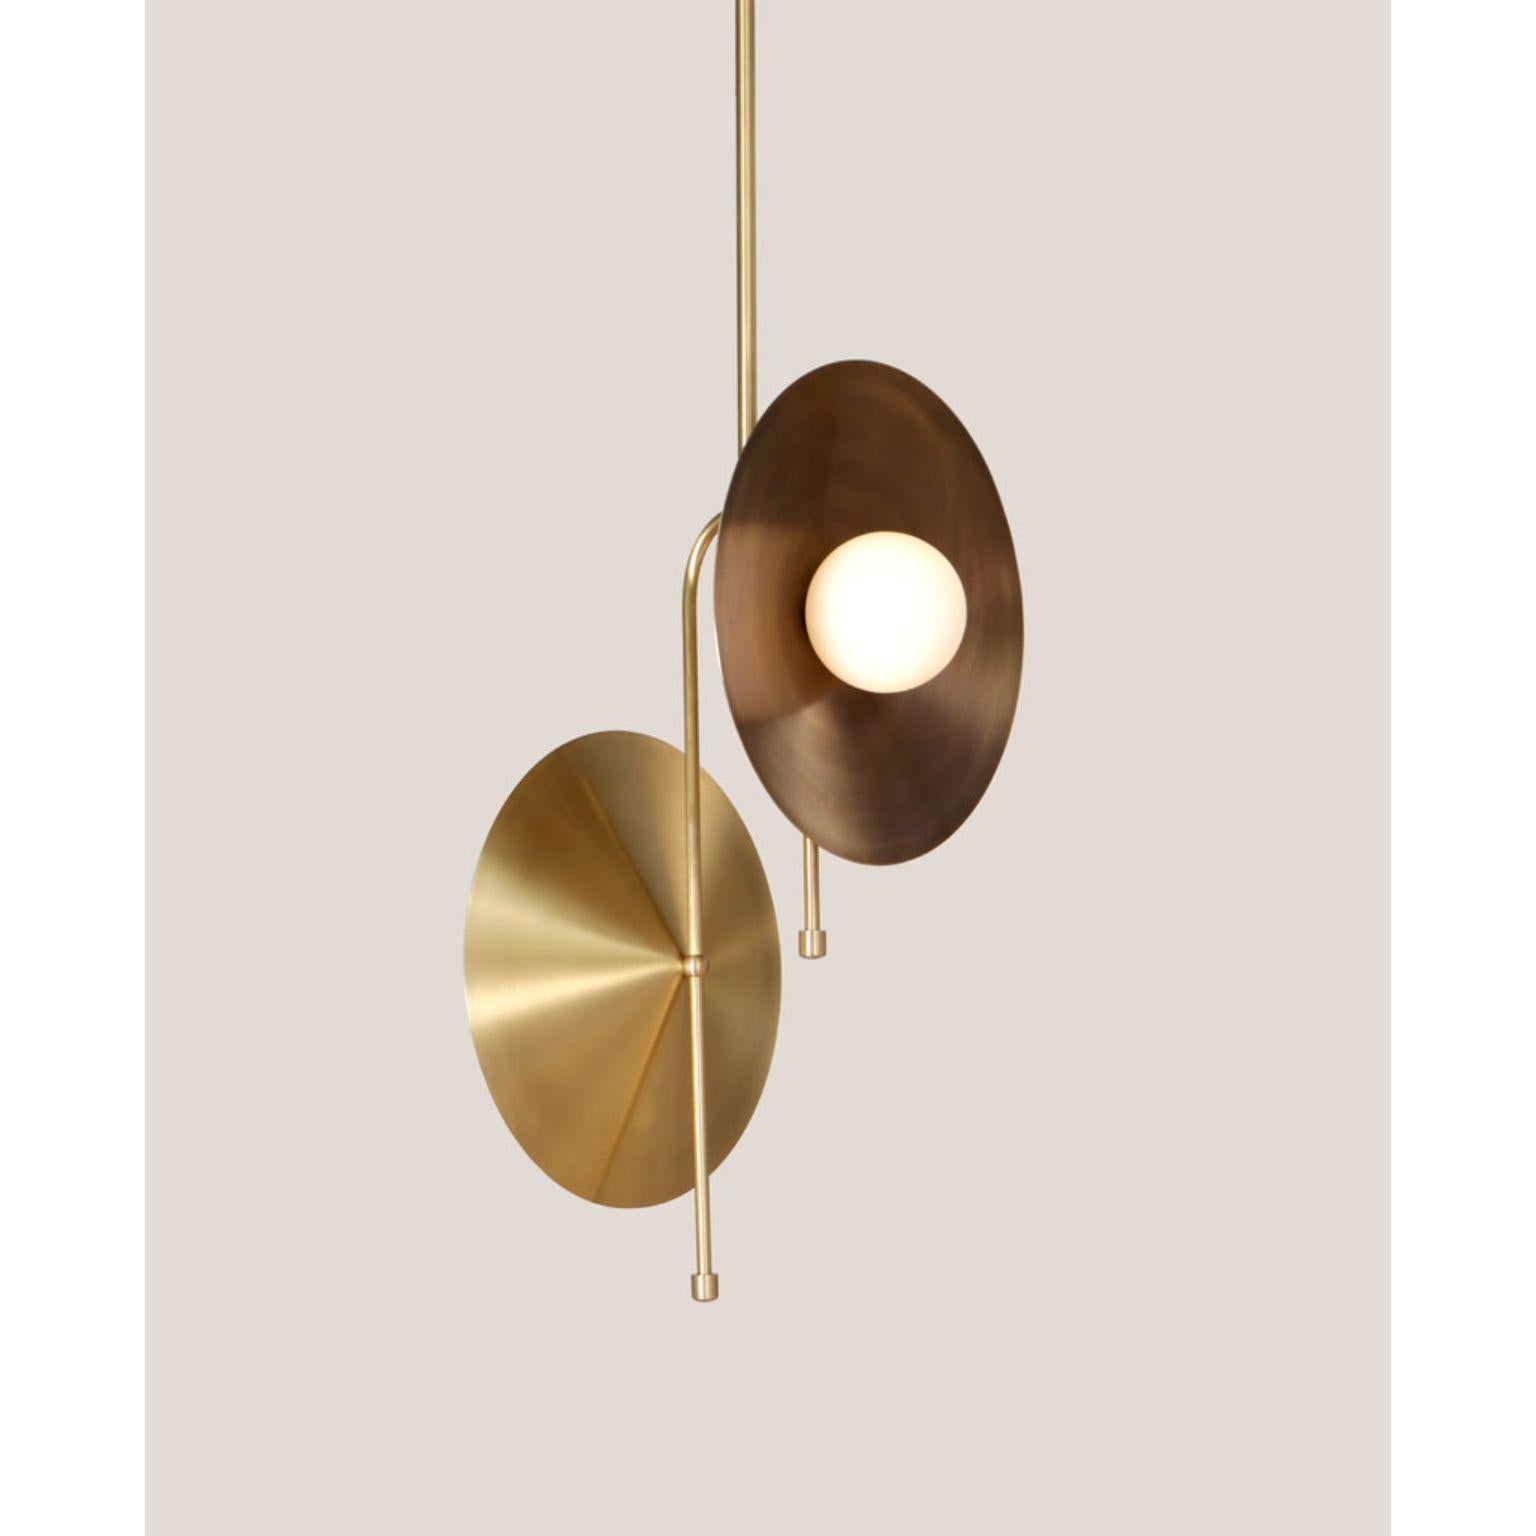 Dew Pendant Lamp by Lamp Shaper
Dimensions: D 30 x W 32.5 x H 127 cm.
Materials: Brass.

Different finishes available: raw brass, aged brass, burnt brass and brushed brass Please contact us.

All our lamps can be wired according to each country. If